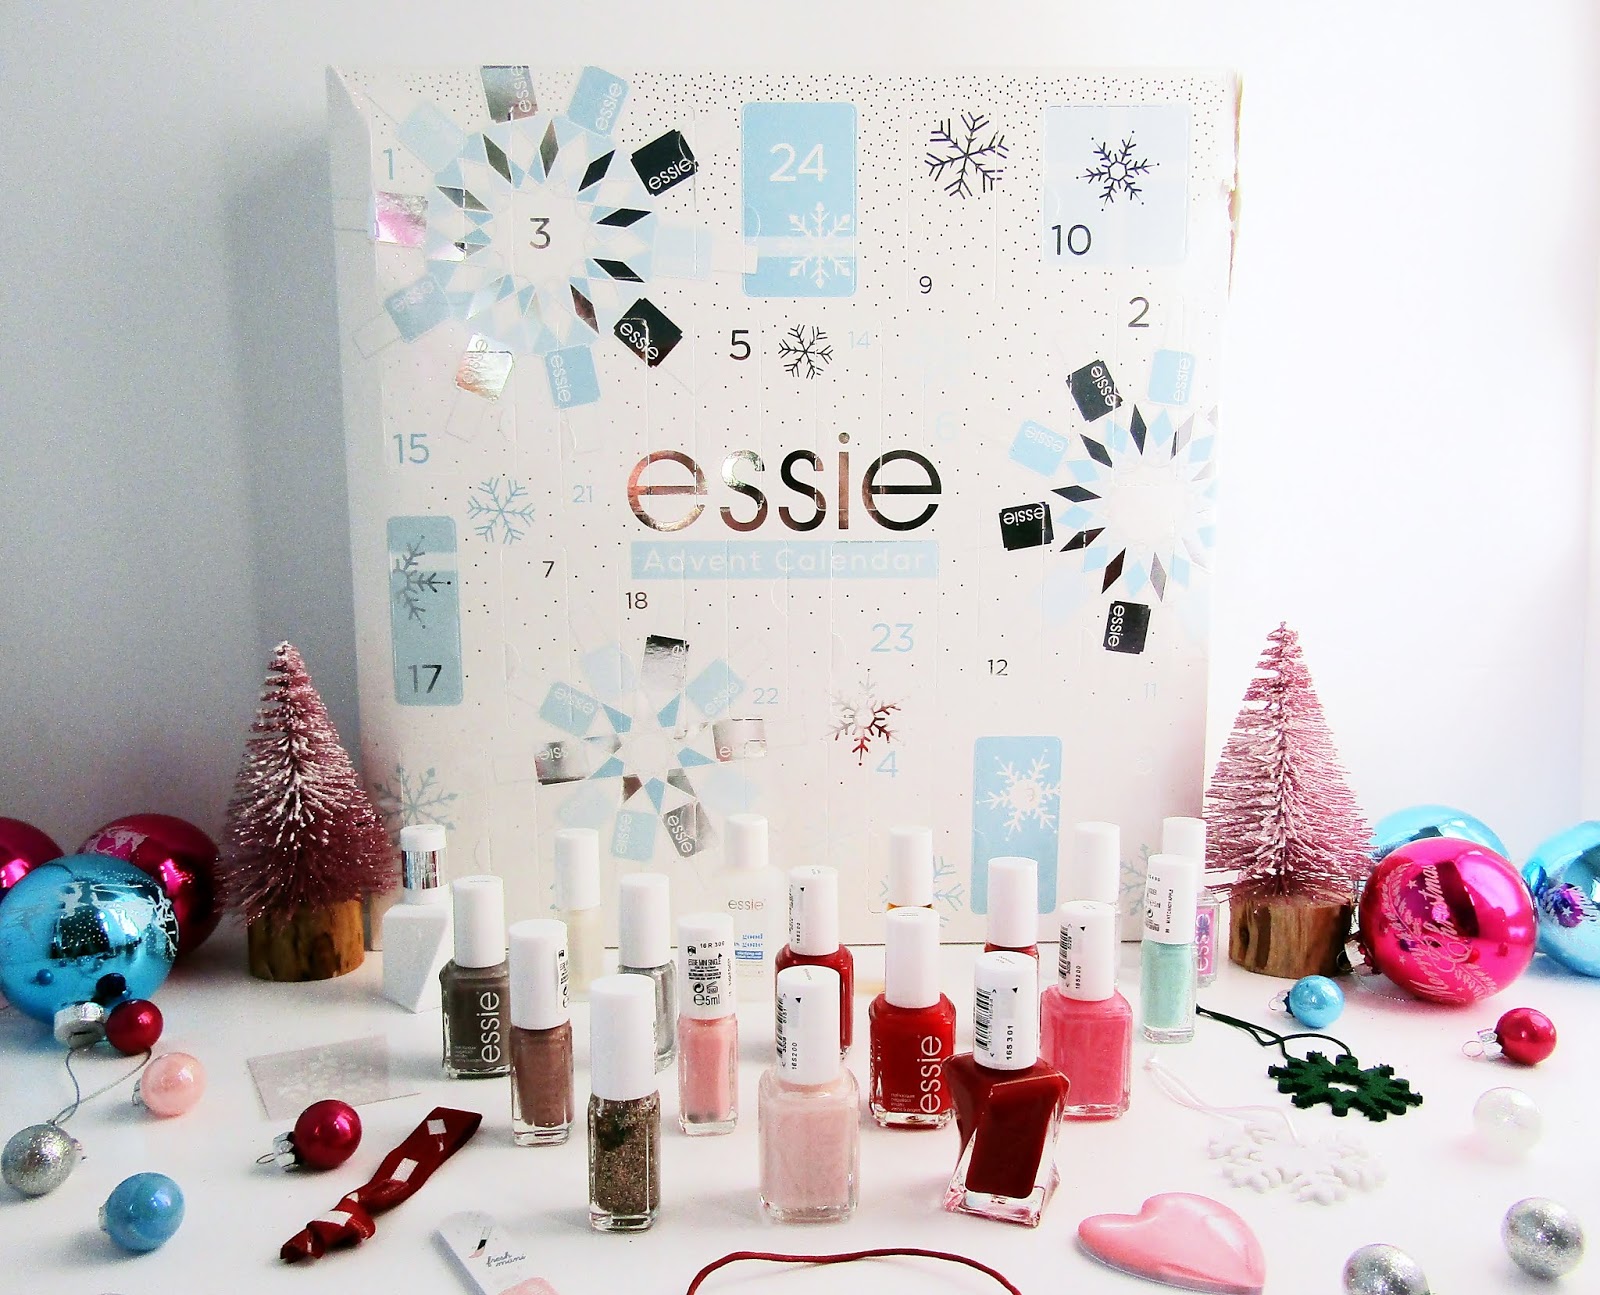 Essie Nail Polish Advent Calendar Review With Spoilers 2019 Polka